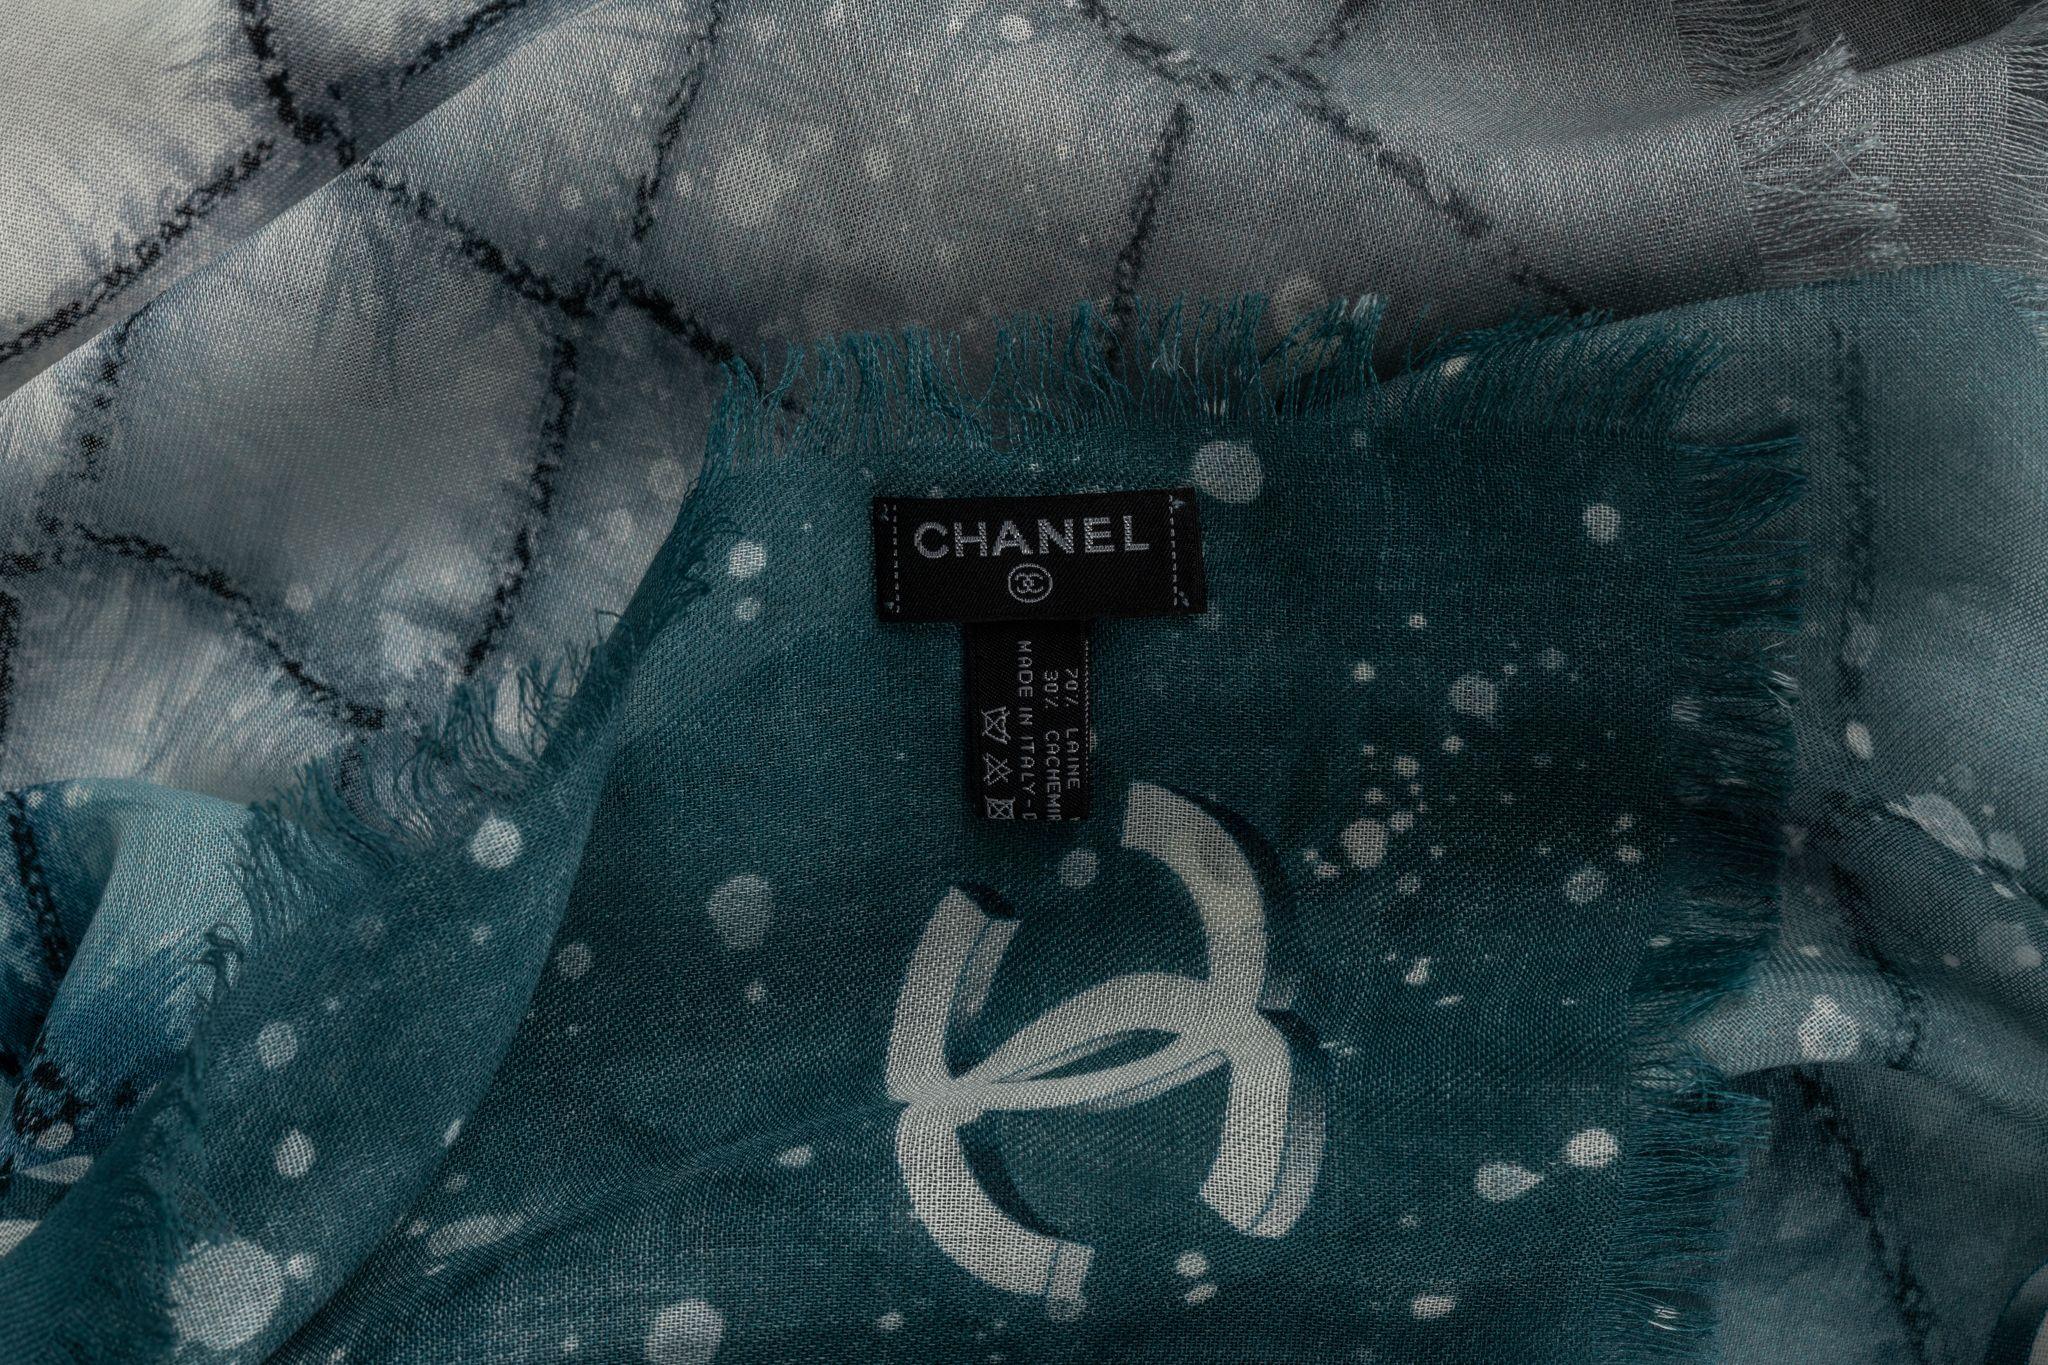 Chanel cashmere shawl in white with blue . The pattern features a checkered design in a blue and a CC logo frame. The item is in new condition.